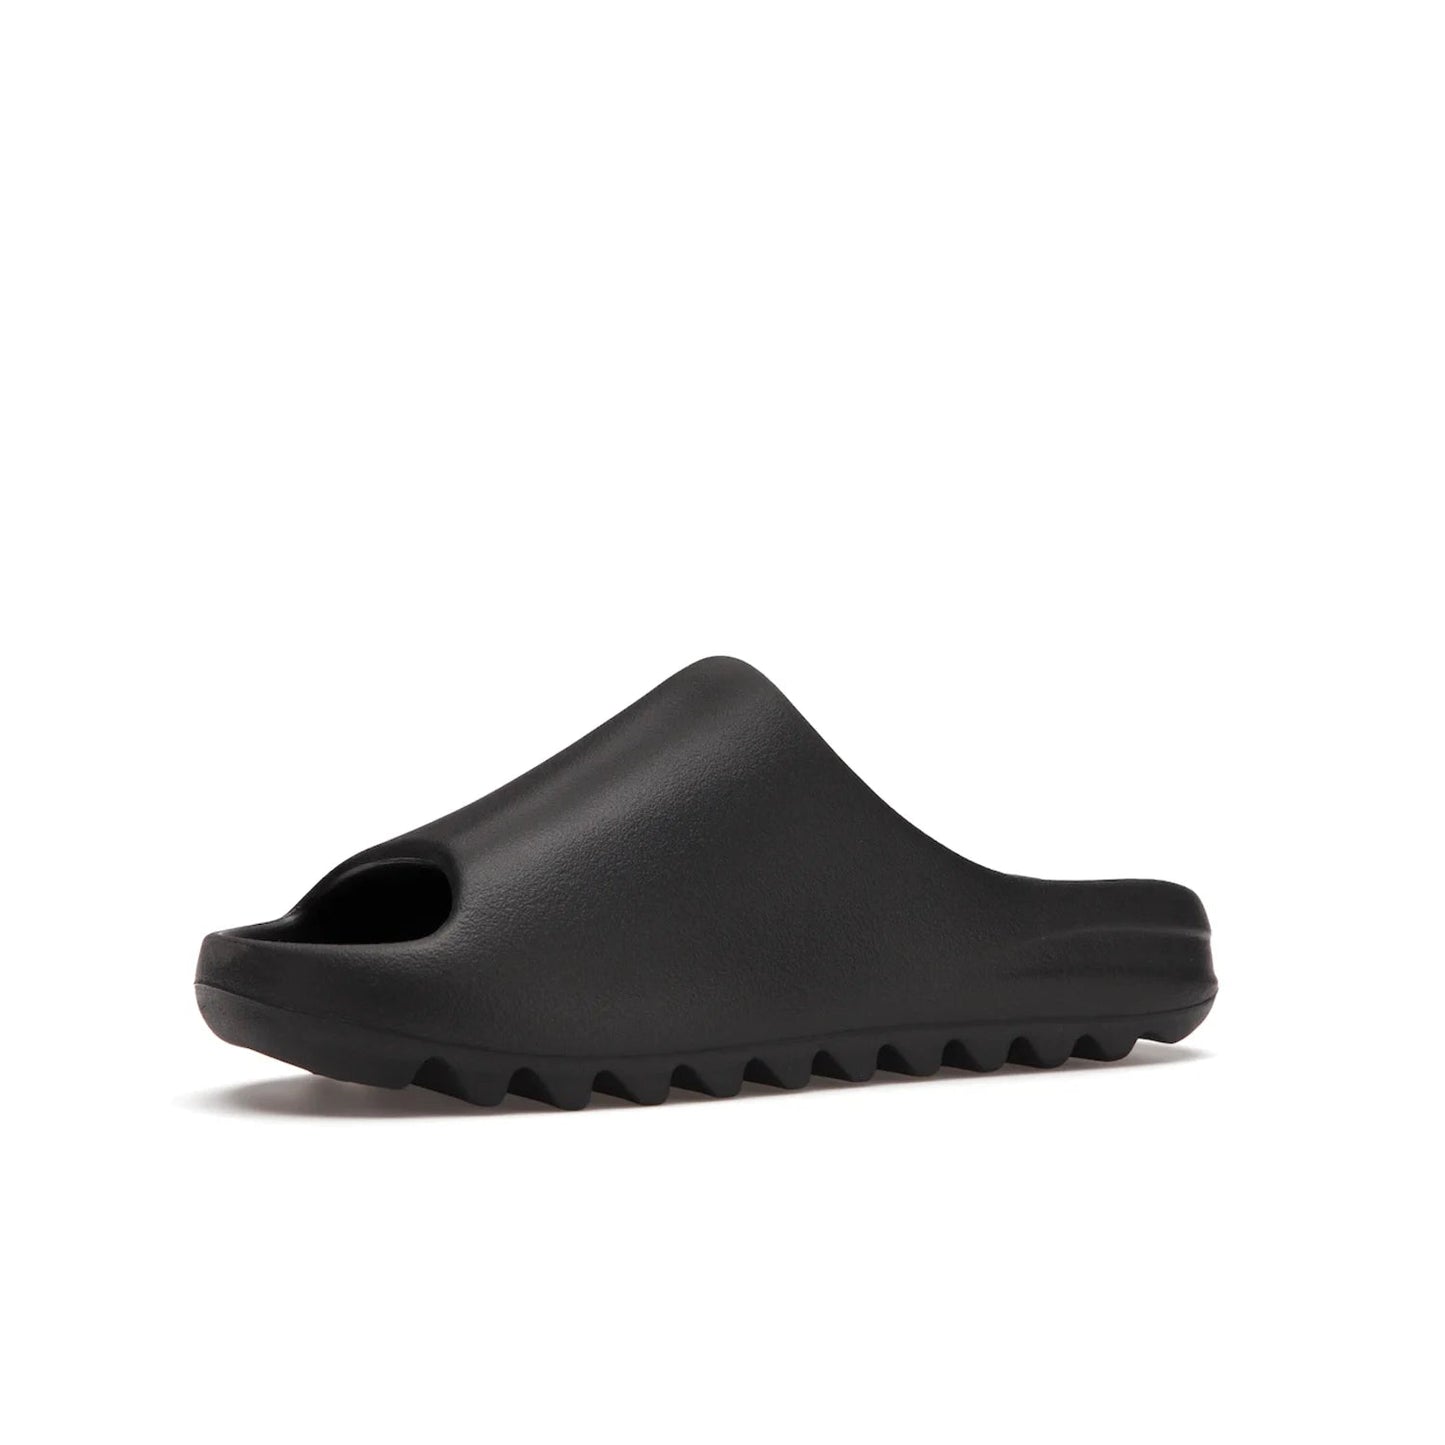 adidas Yeezy Slide Onyx - Image 16 - Only at www.BallersClubKickz.com - Step into comfort and style with the adidas Yeezy Slide Onyx. Featuring foam construction, an all-black colorway and a grooved outsole for stability and responsiveness, this versatile slide is a must-have for your collection.